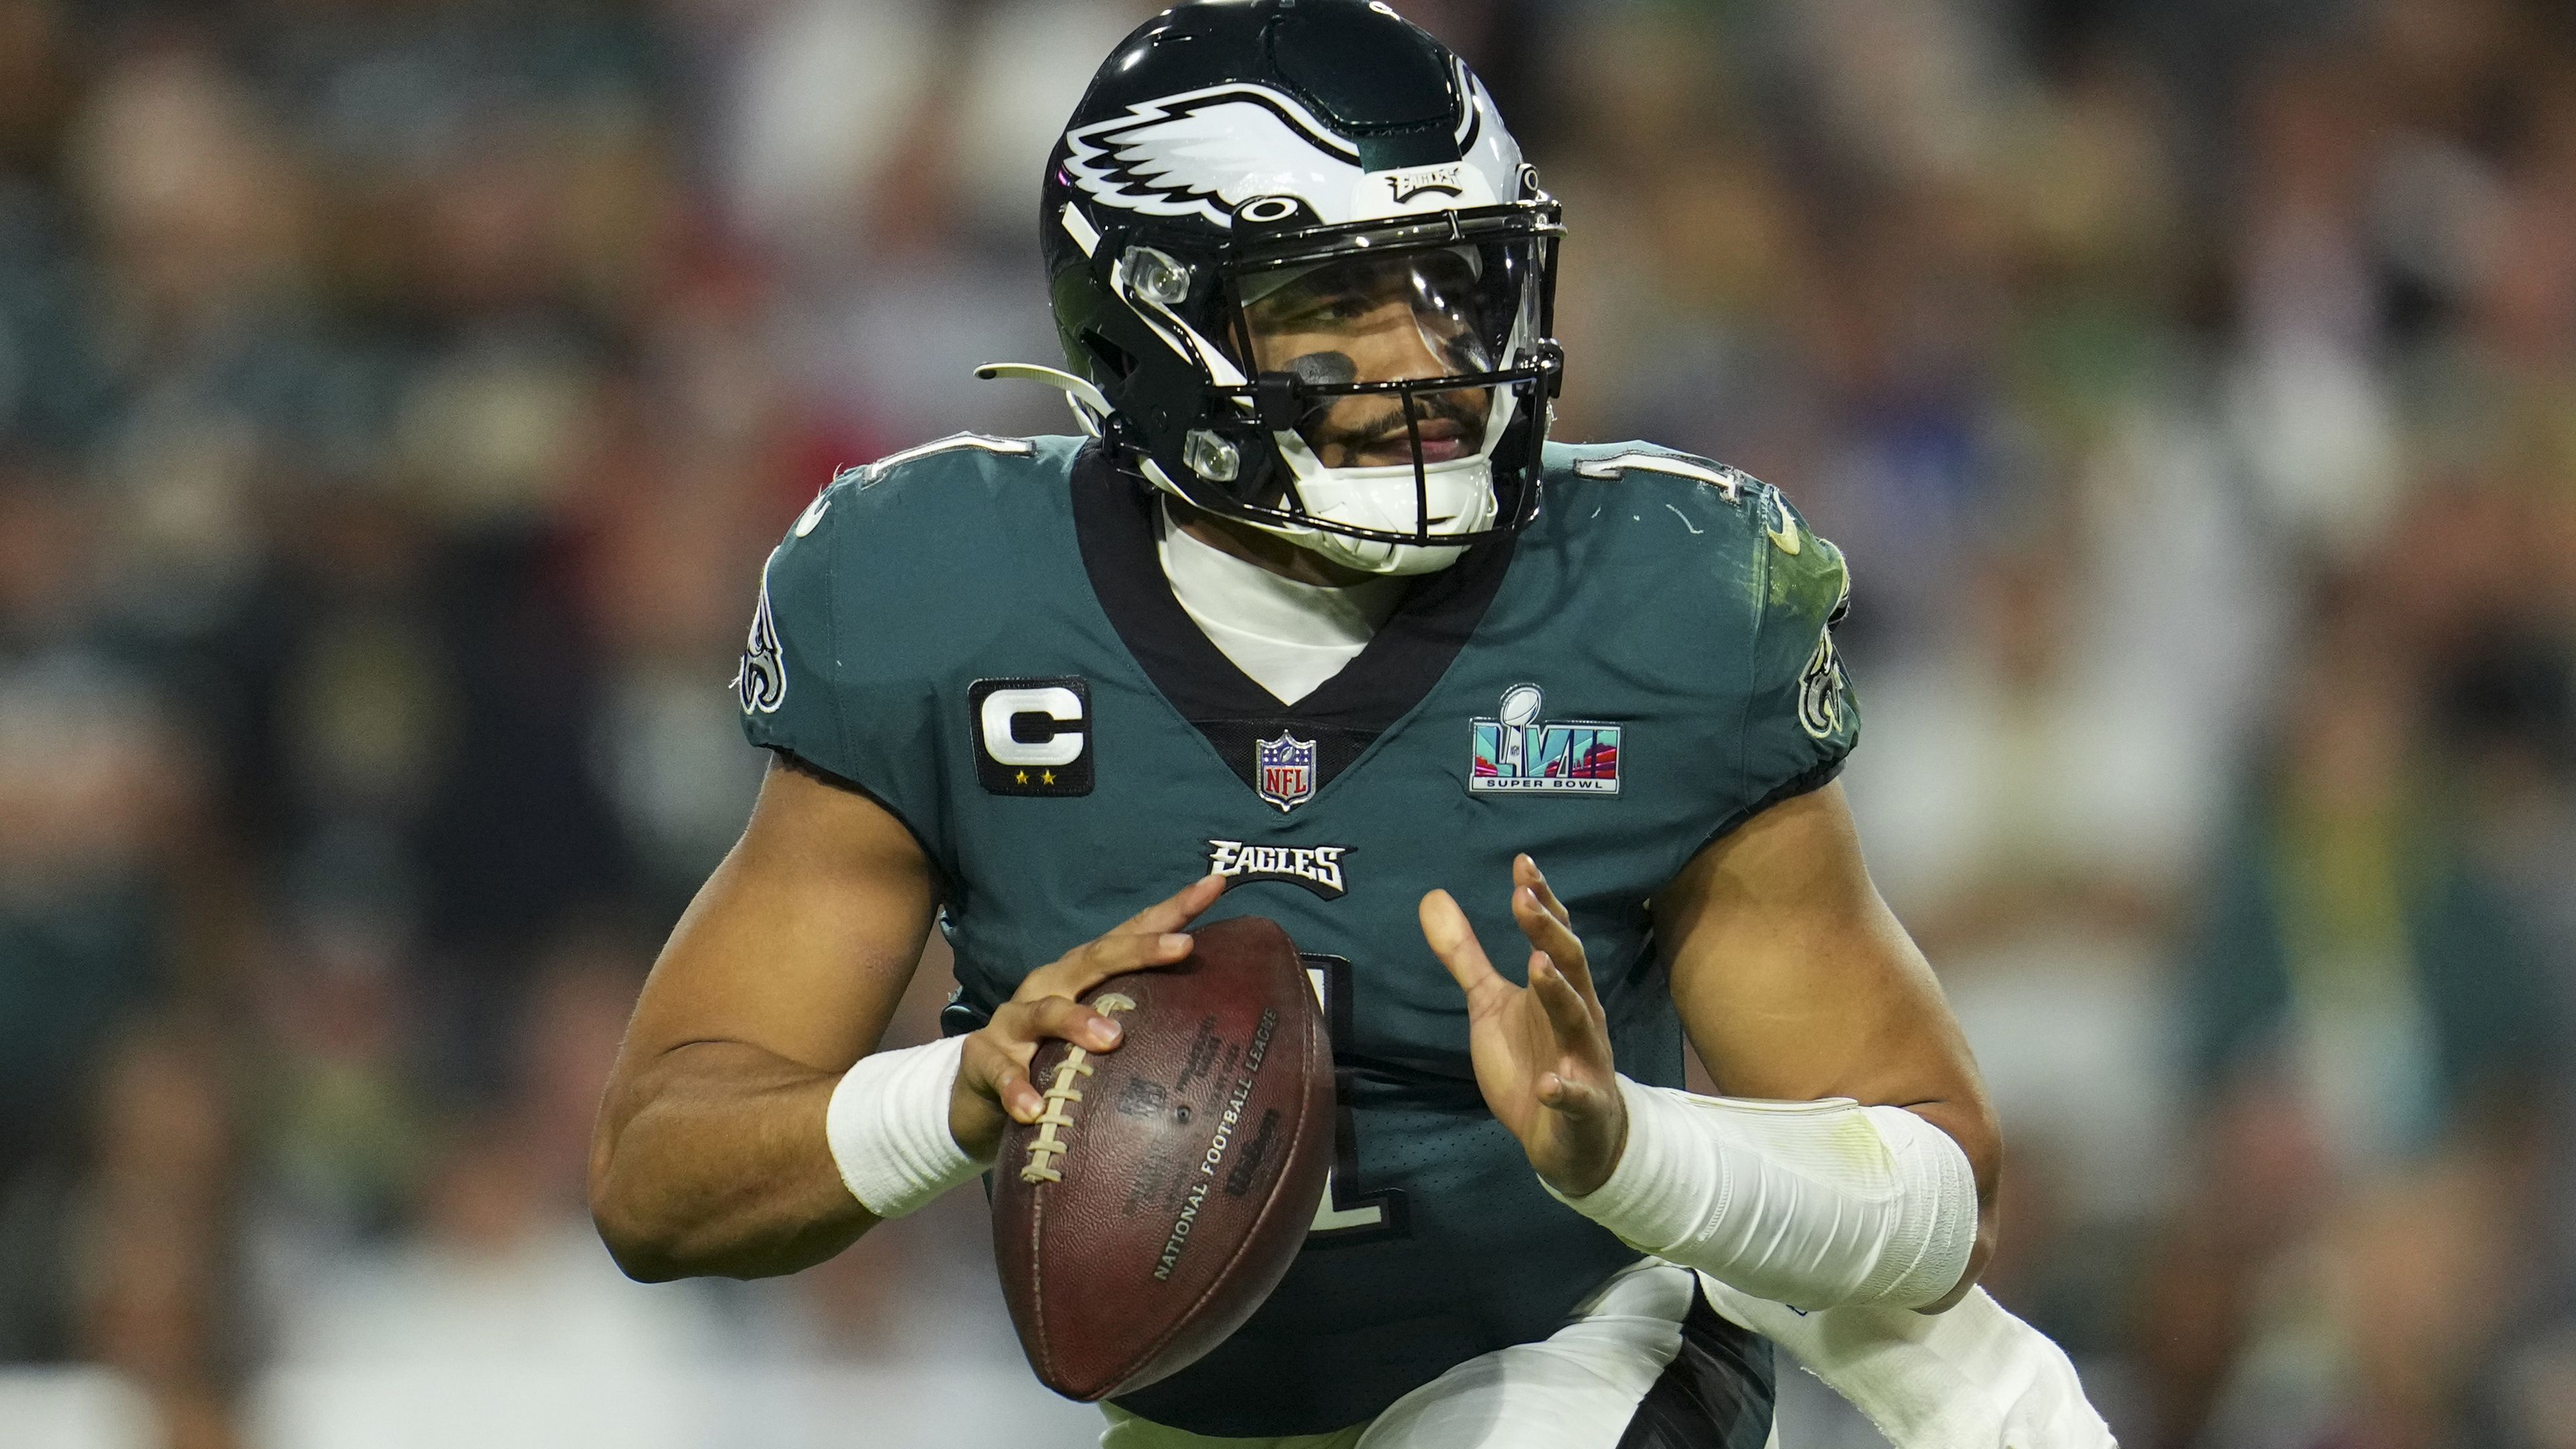 Jalen Hurts breaks Super Bowl records in all-time great performance despite Eagles loss